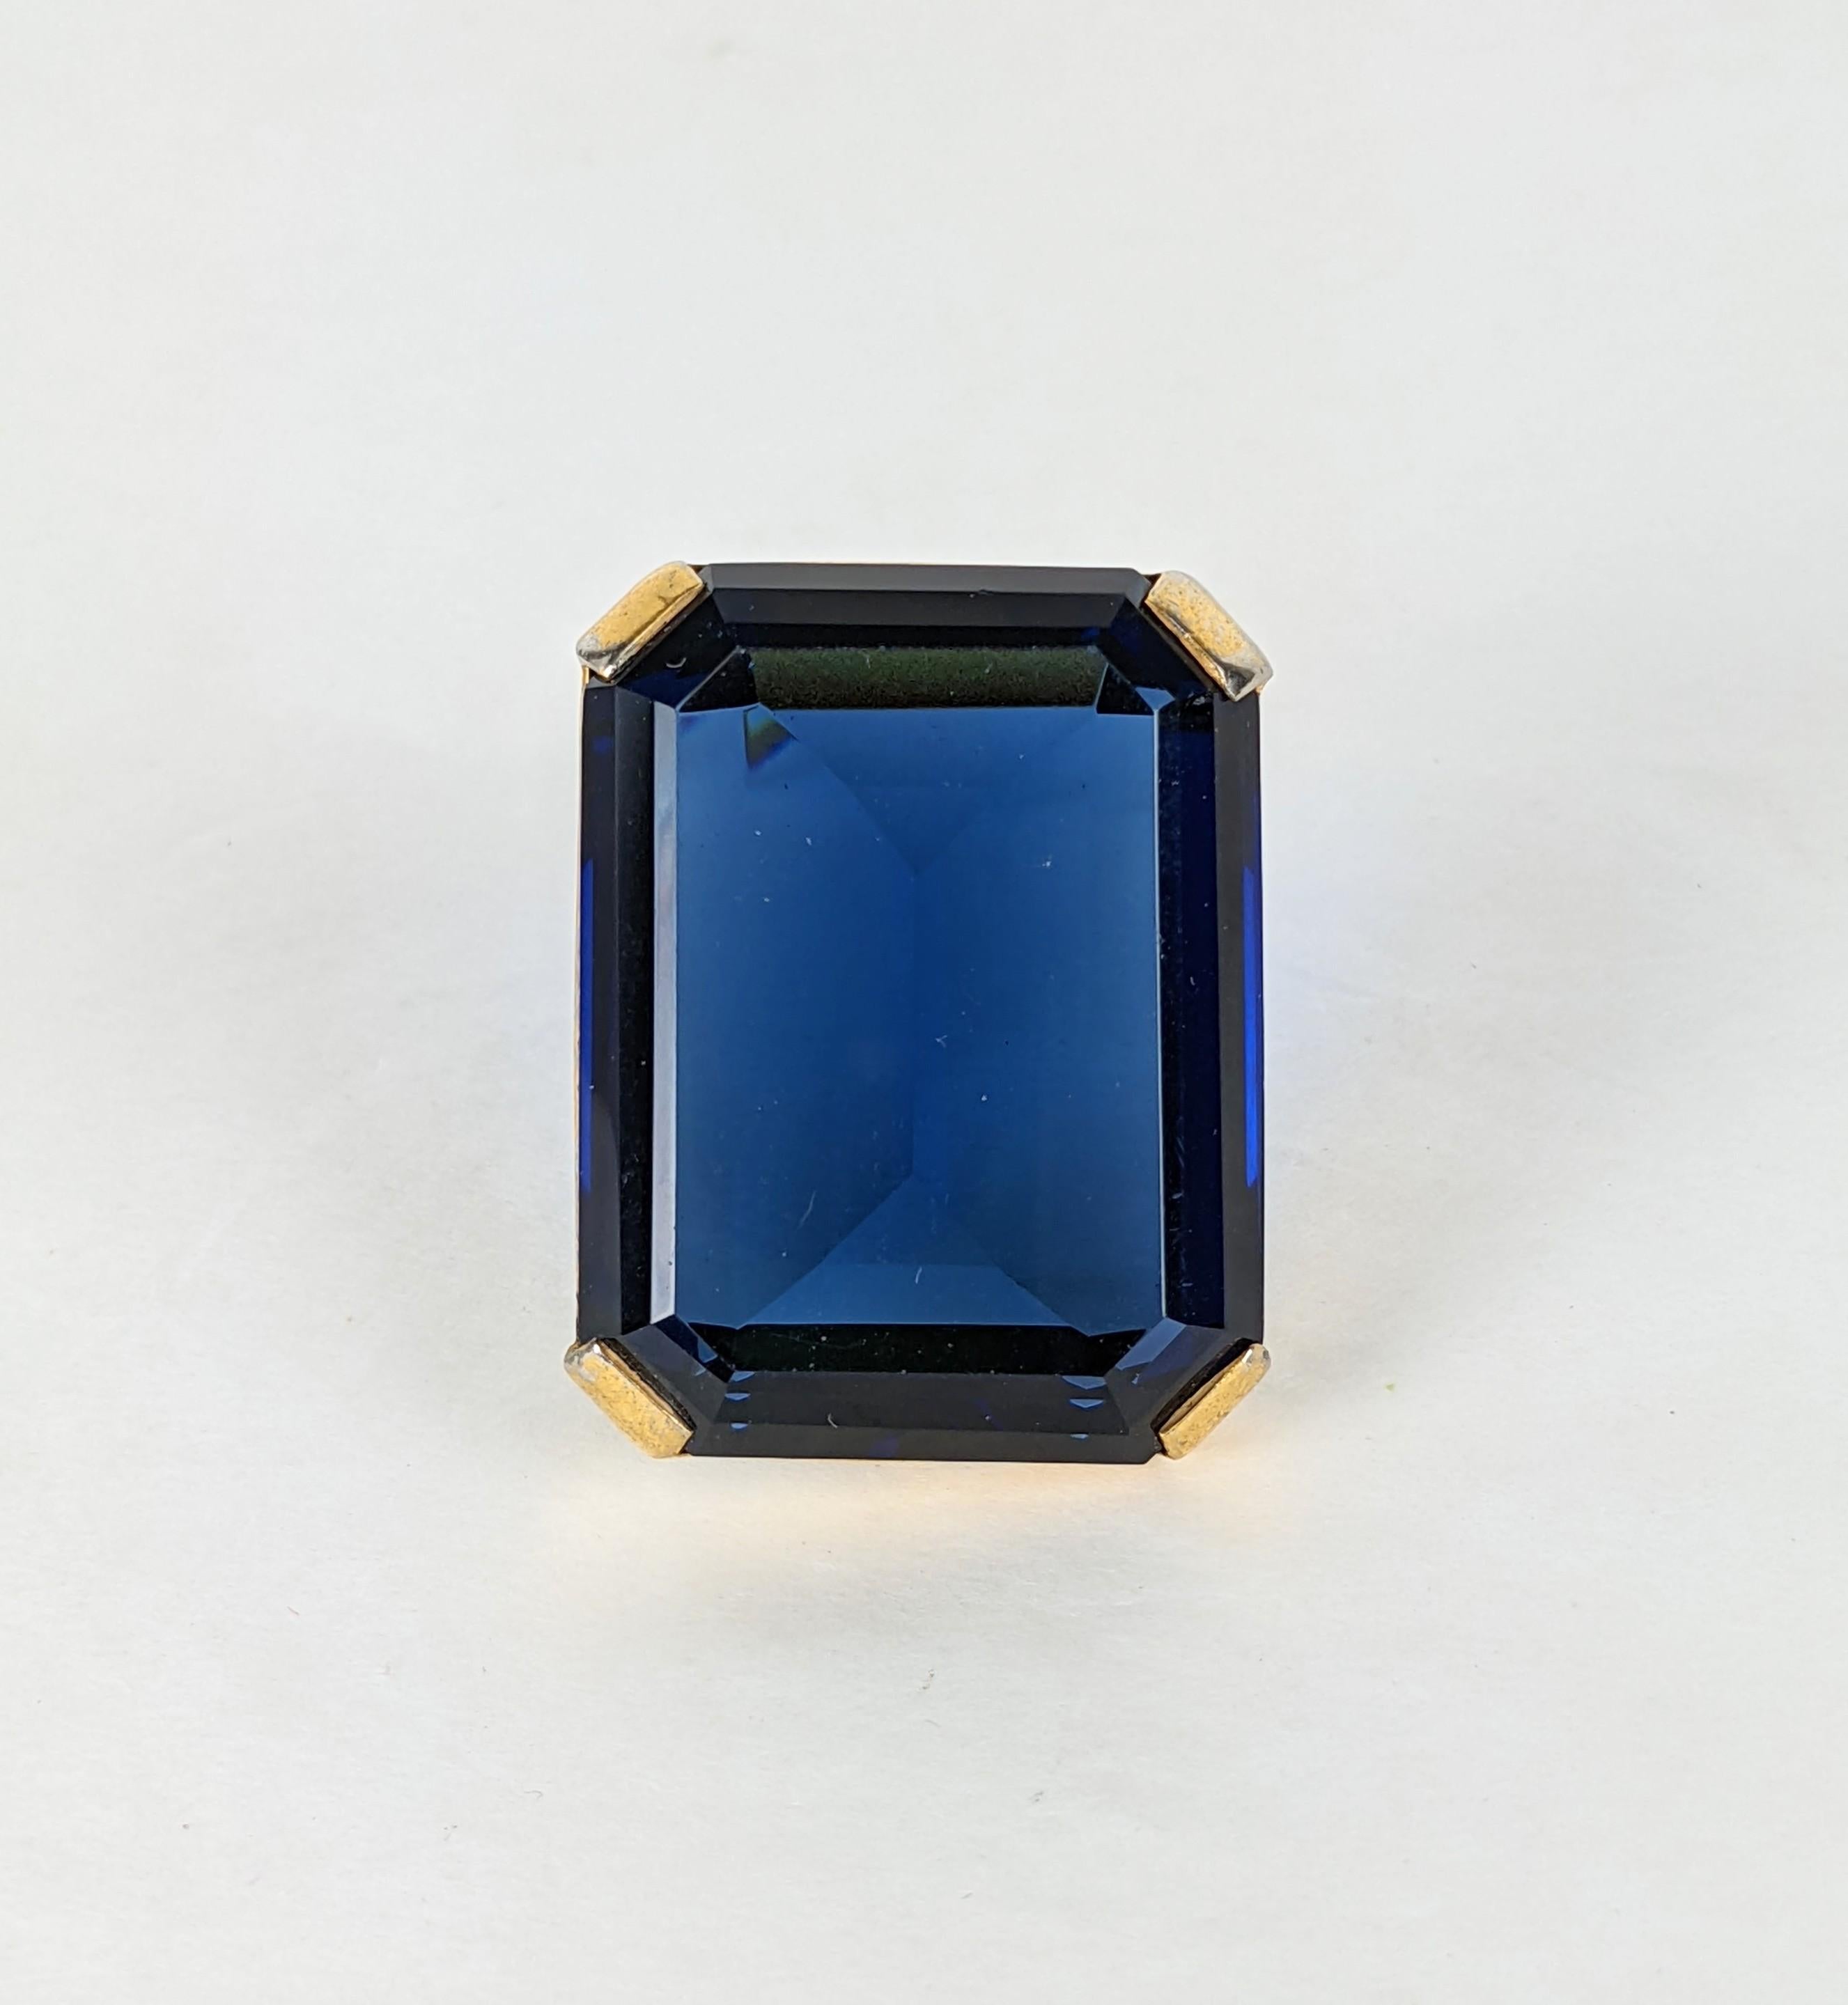 Trifari Alfred Phillipe Large Sapphire Clip from the 1930's Art Deco period. Gilt metal with large emerald cut sapphire paste, simple and elegant. 1.5